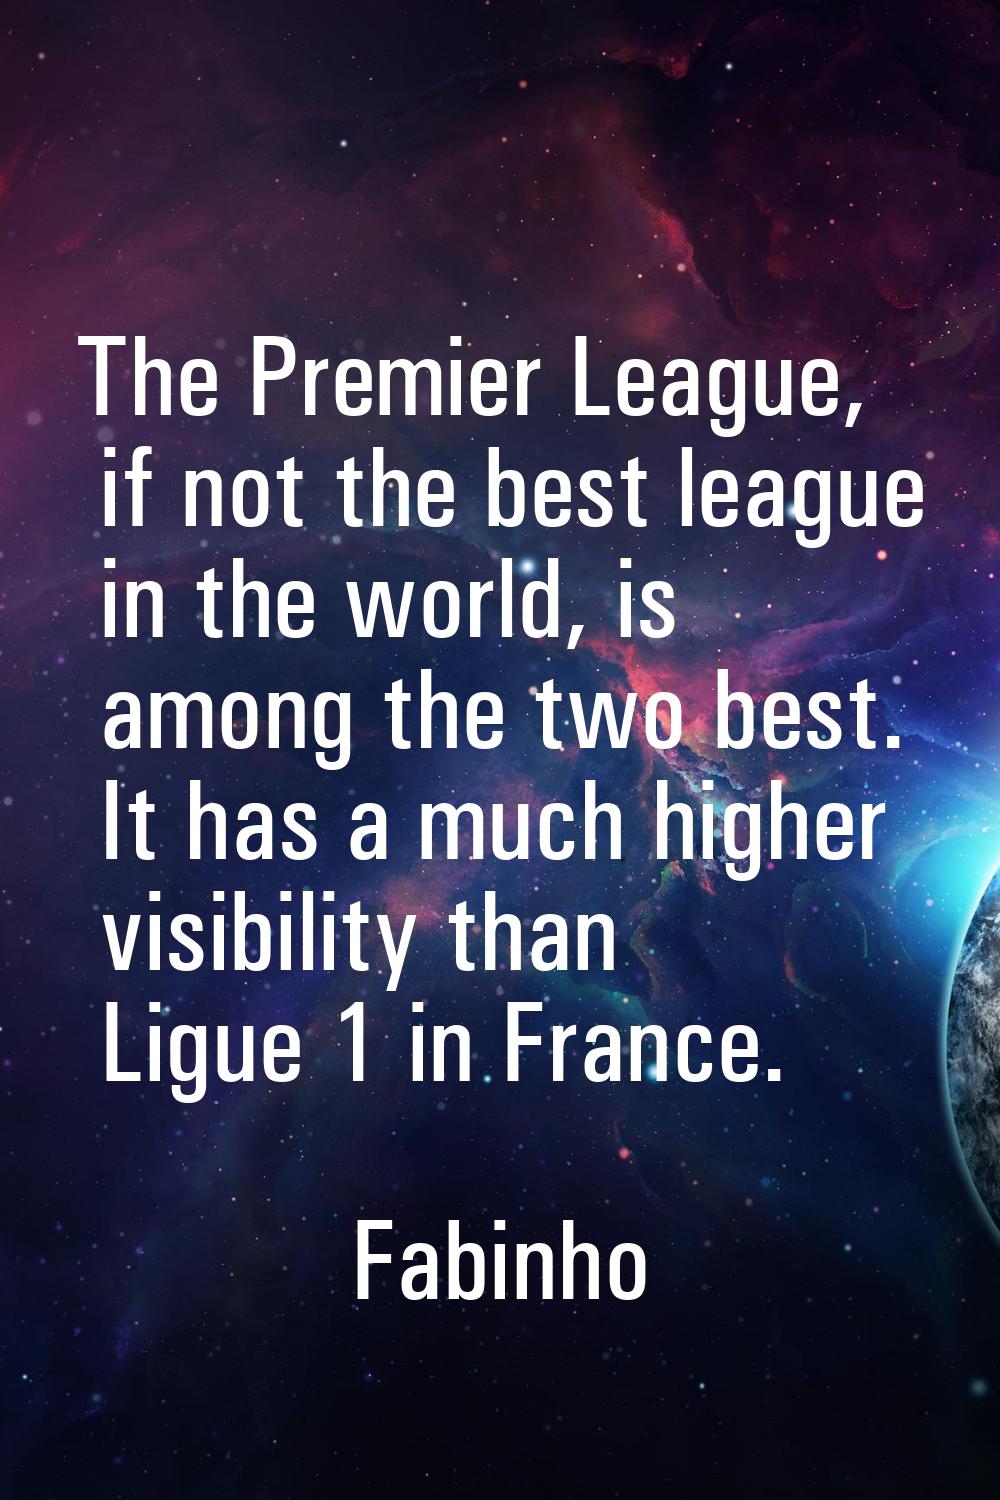 The Premier League, if not the best league in the world, is among the two best. It has a much highe